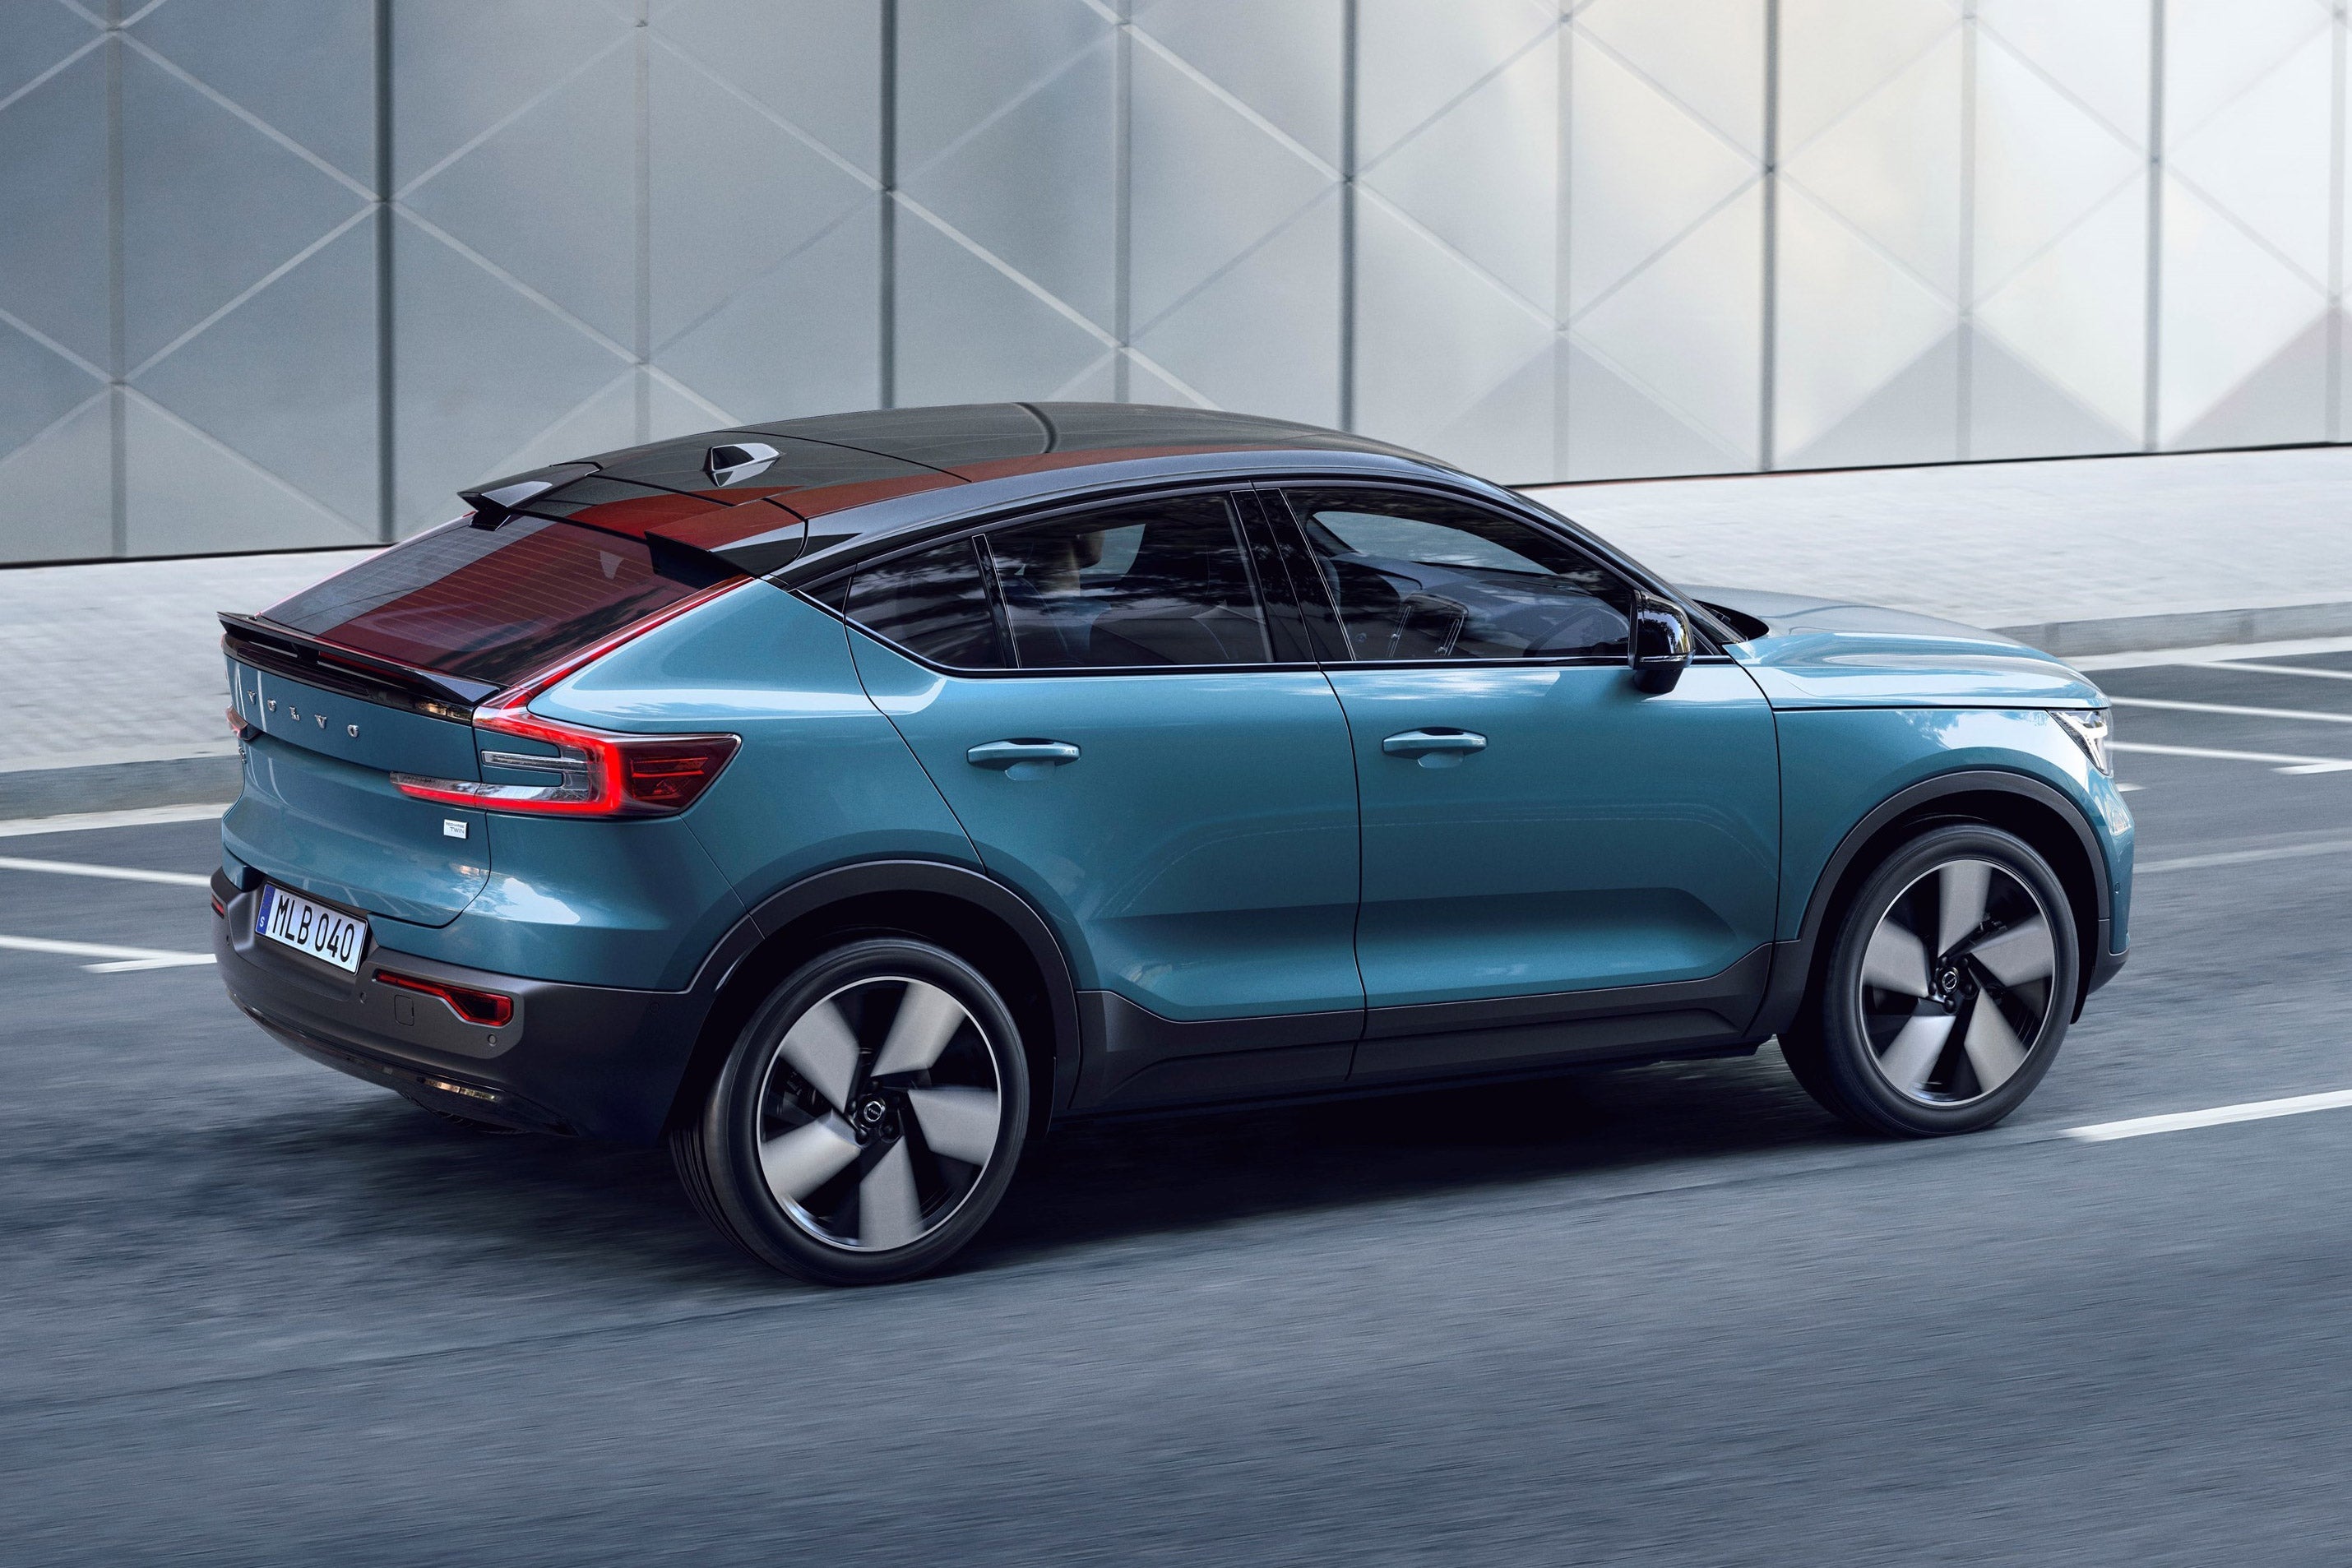 The new Volvo C40 Recharge is almost identical to the Volvo XC40 Recharge up to the front doors, with the main differences at the rear. 